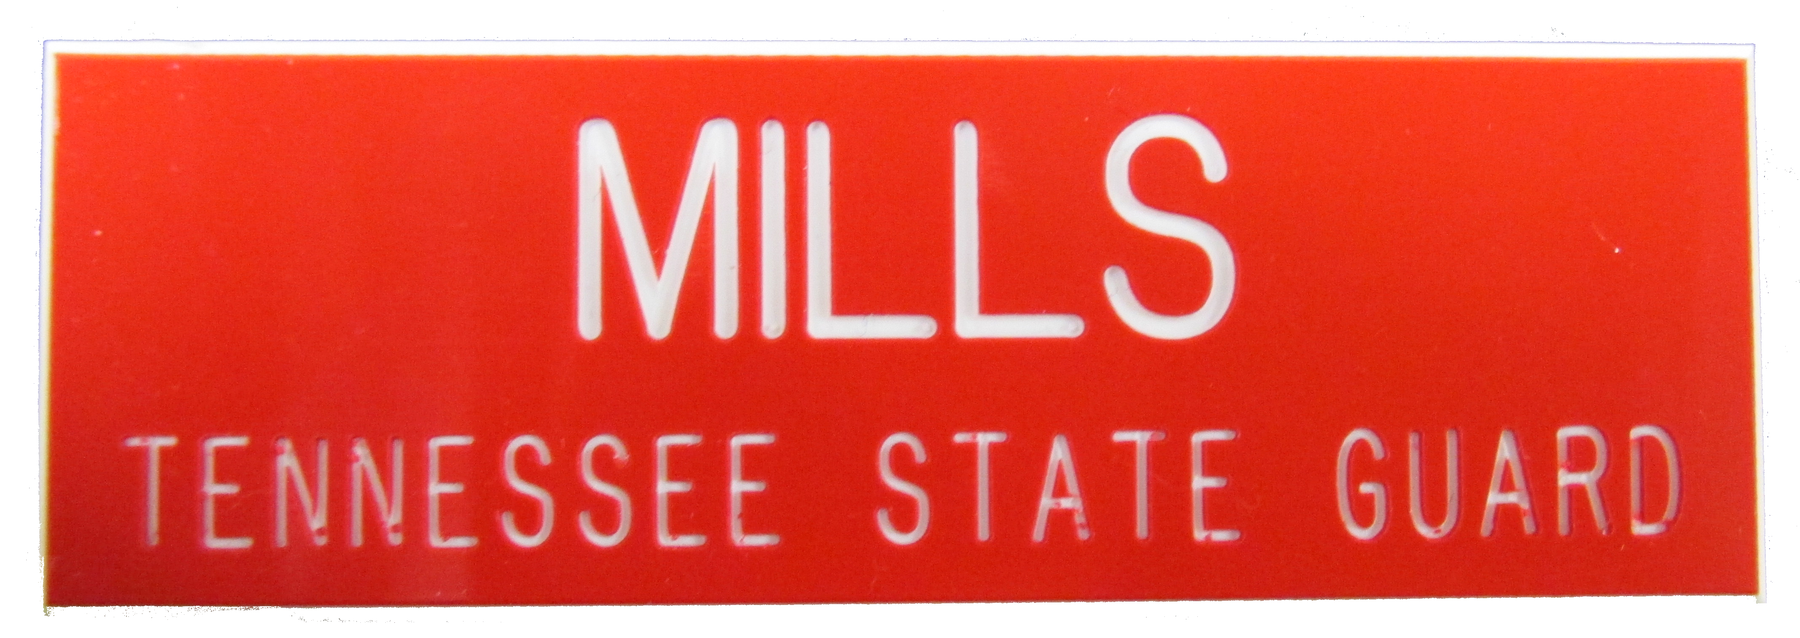 Tennessee State Guard Name Plate